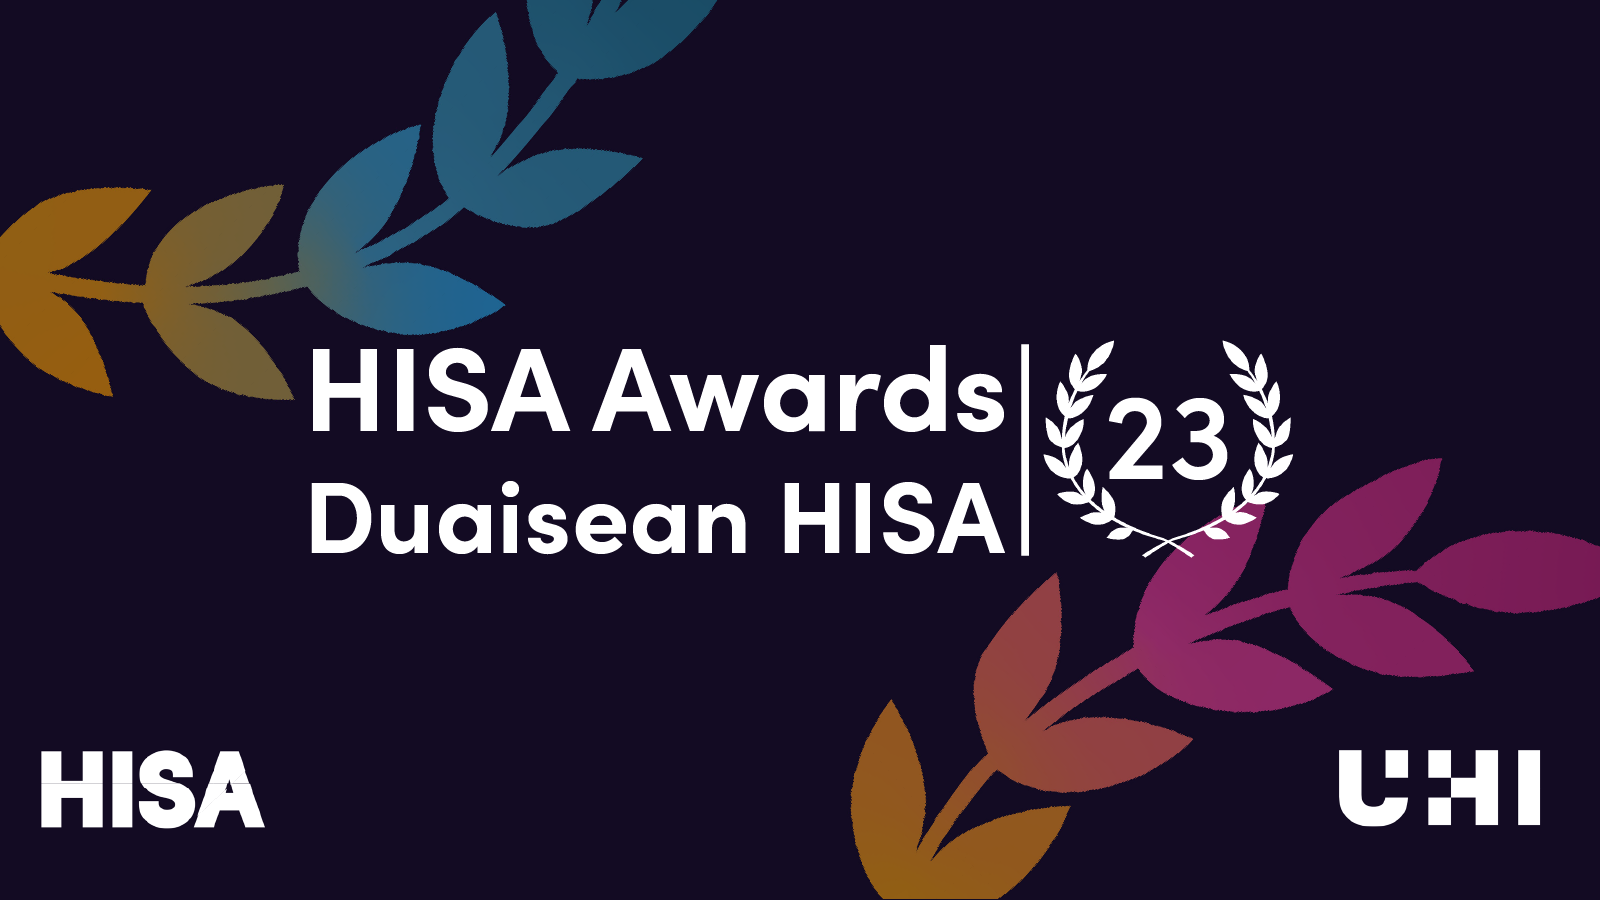 UHI staff and students recognised in in HISA awards